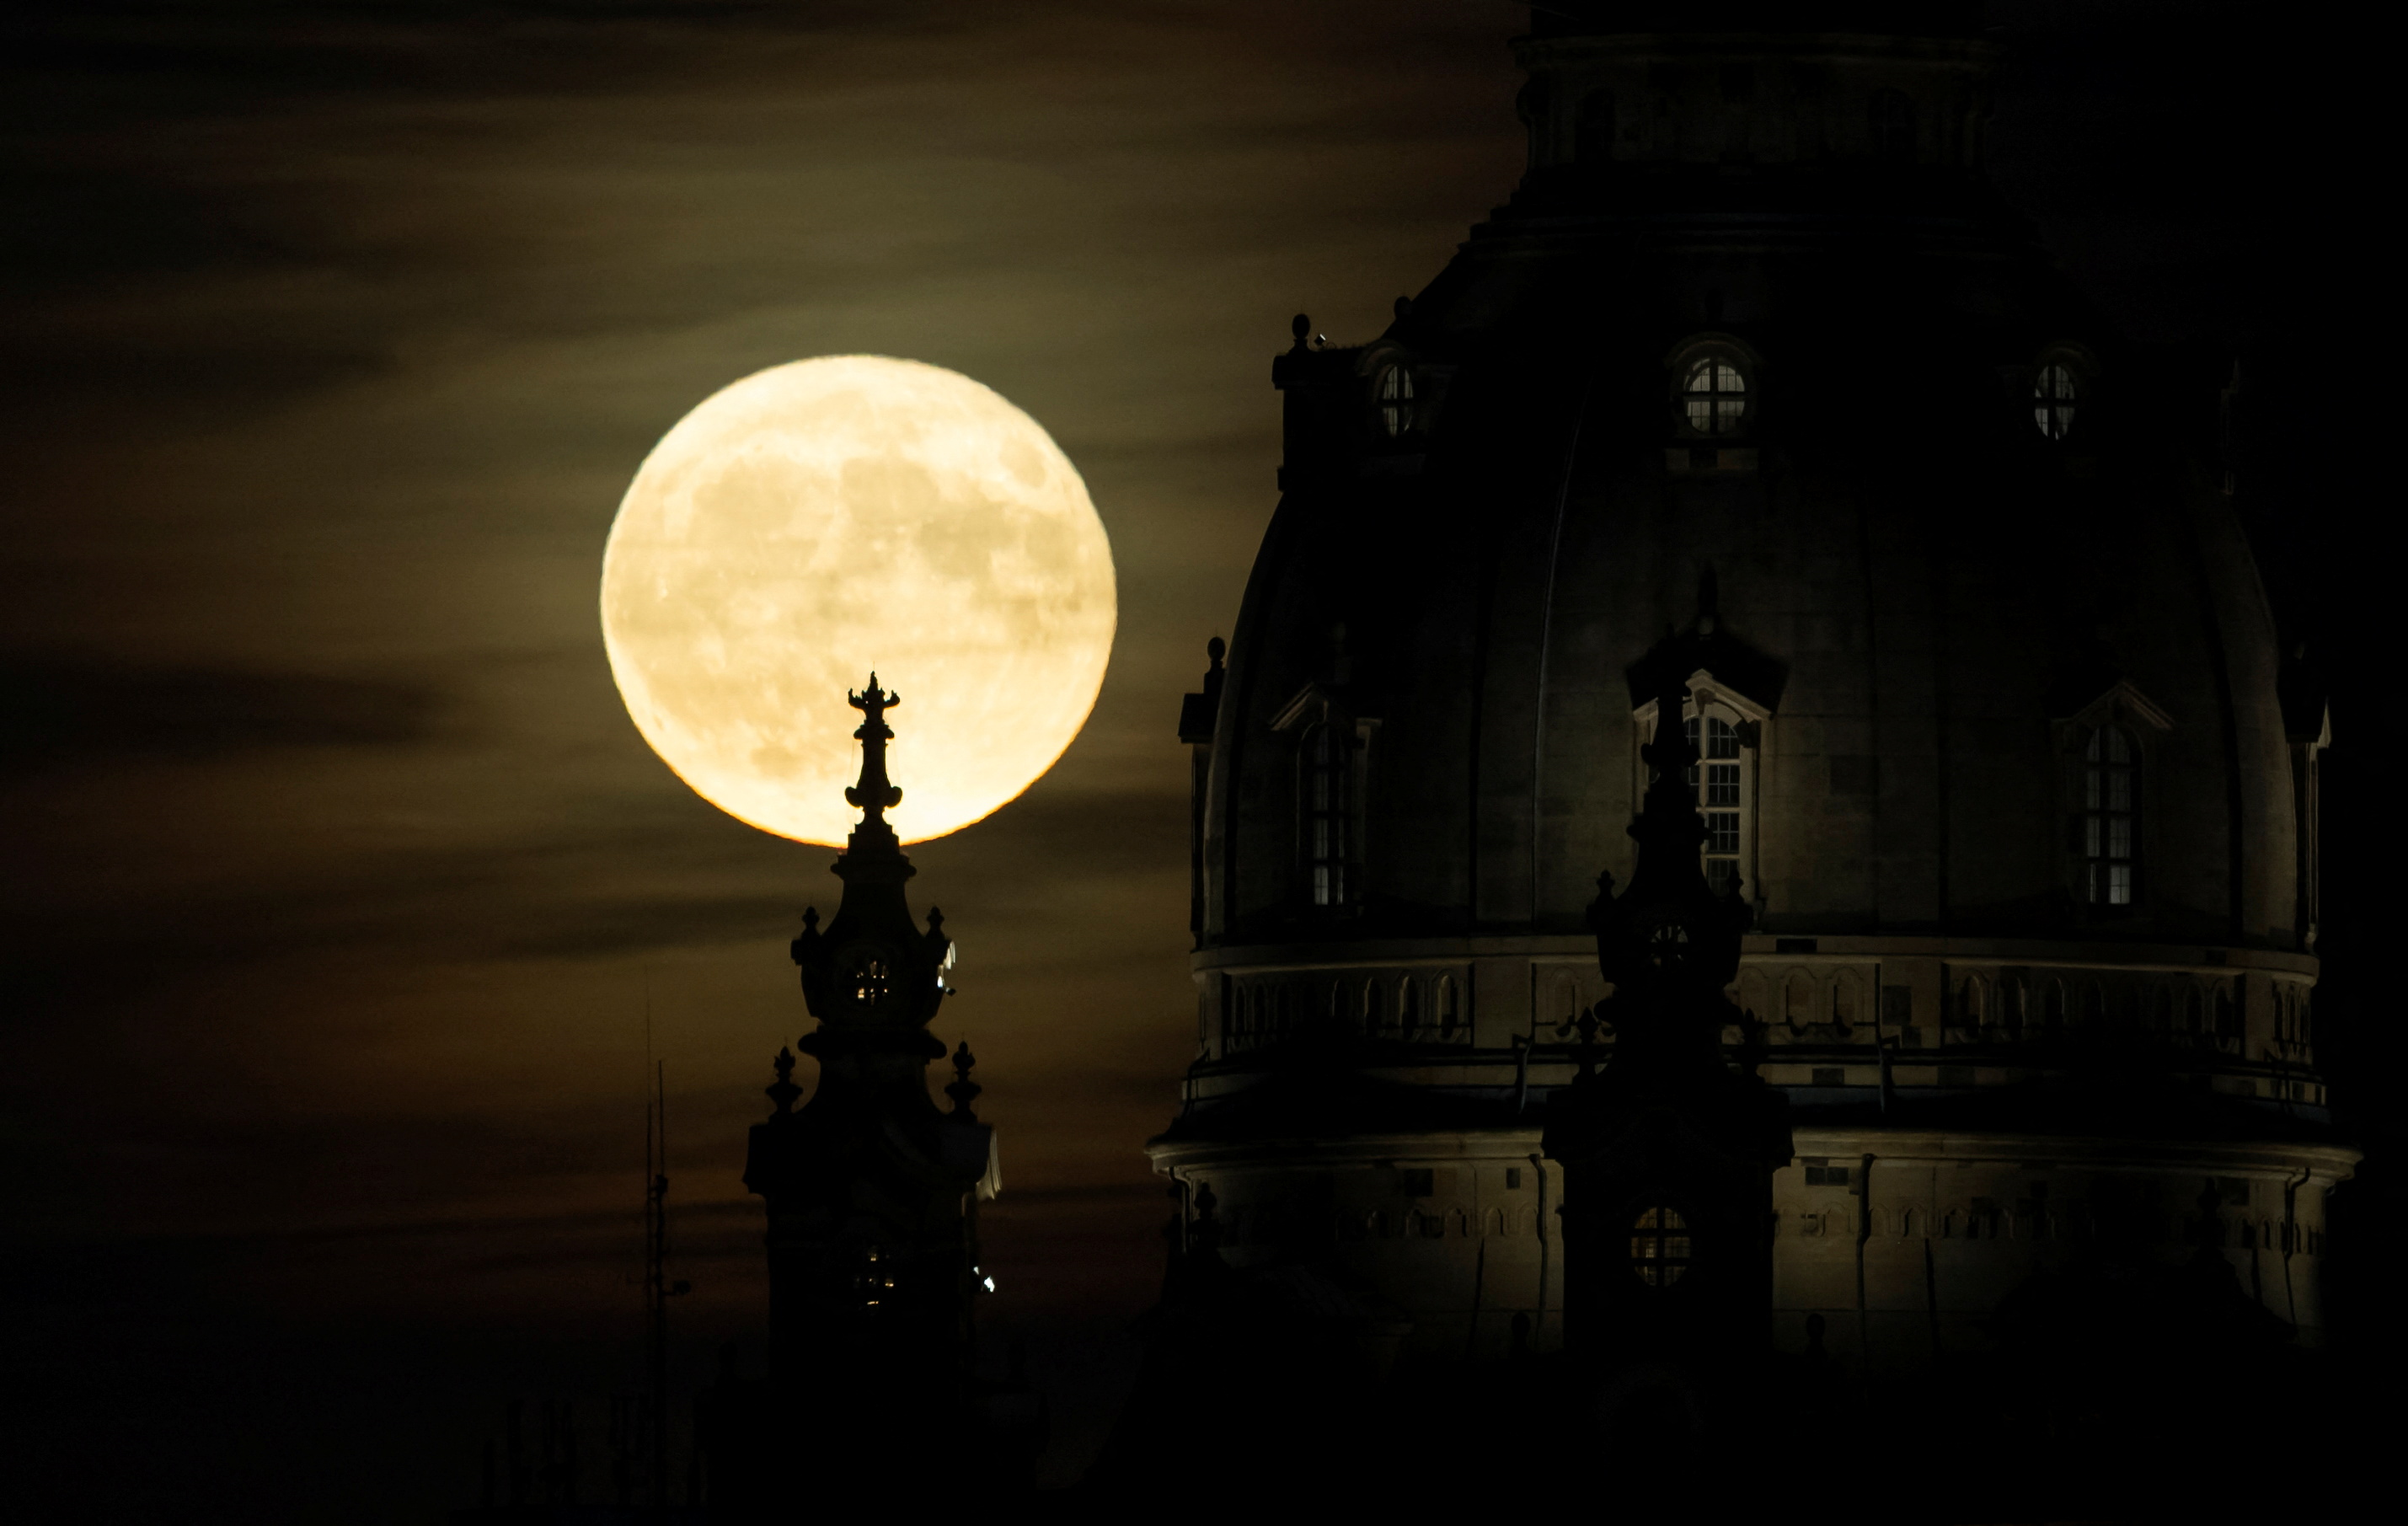 Supermoon known as Strawberry Moon over Dresden